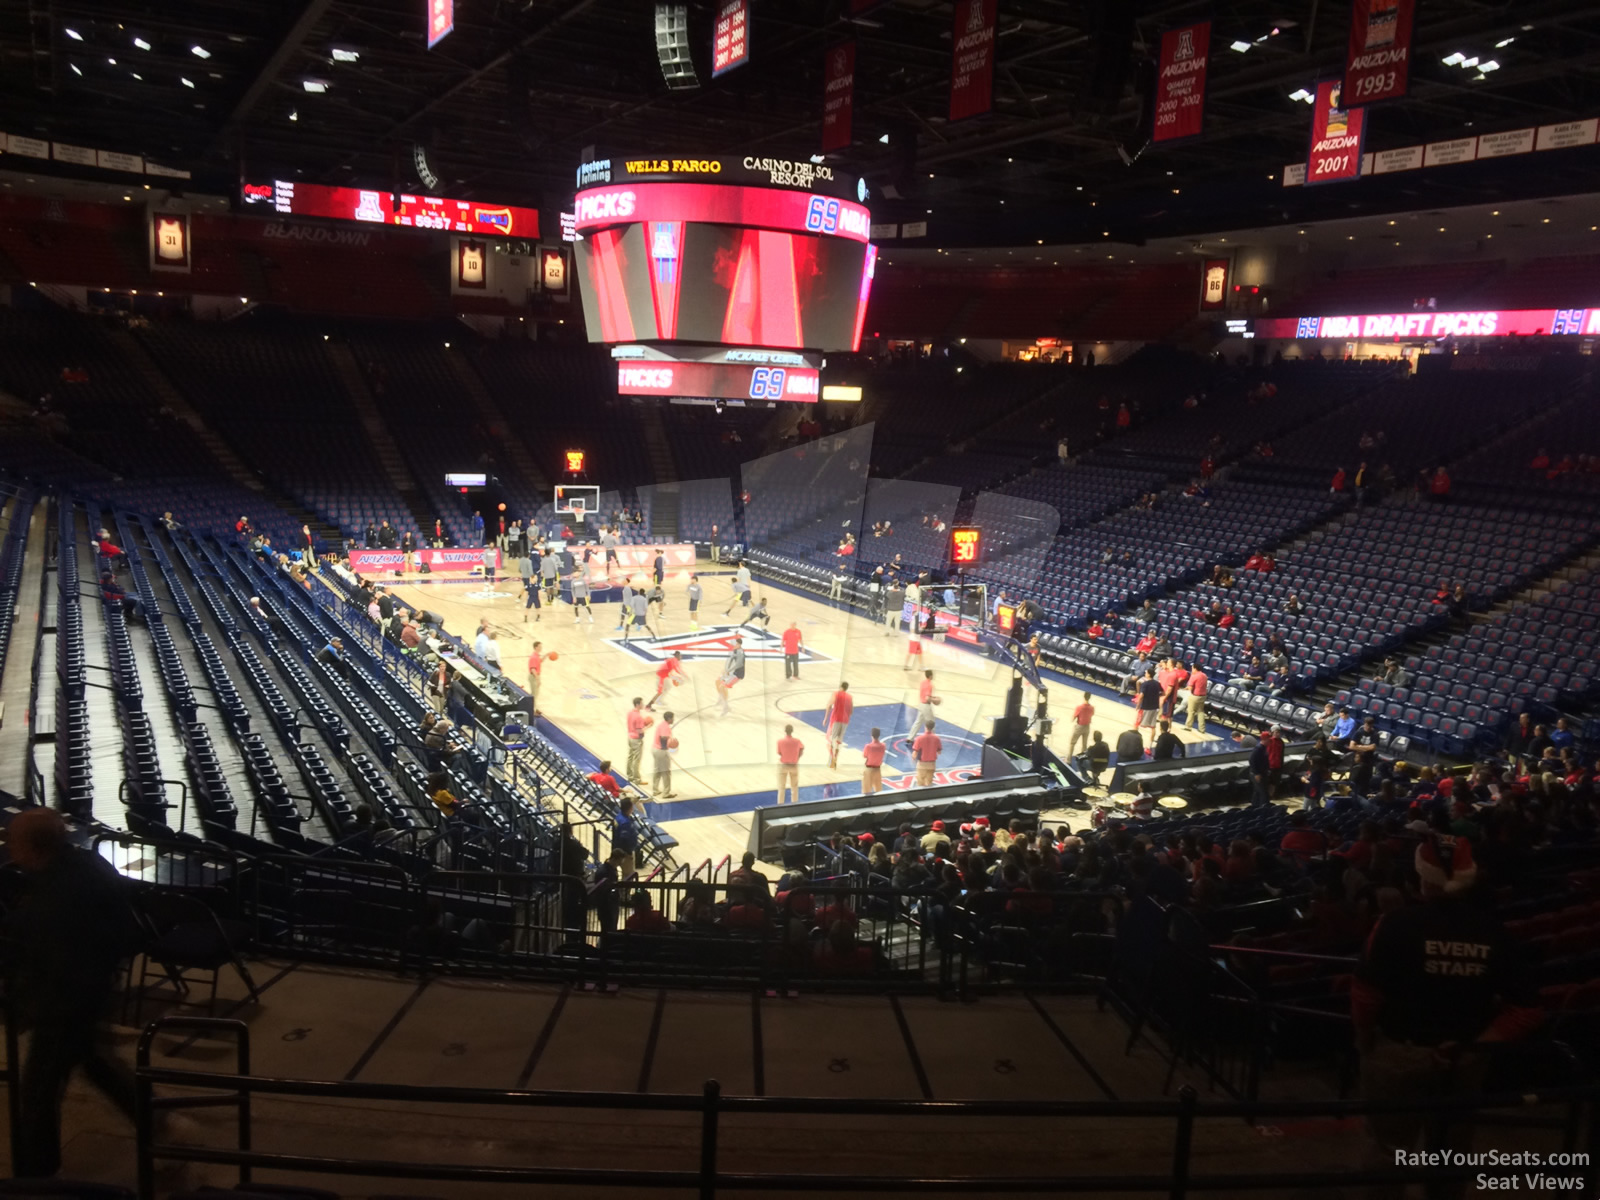 section 23, row 23 seat view  - mckale center